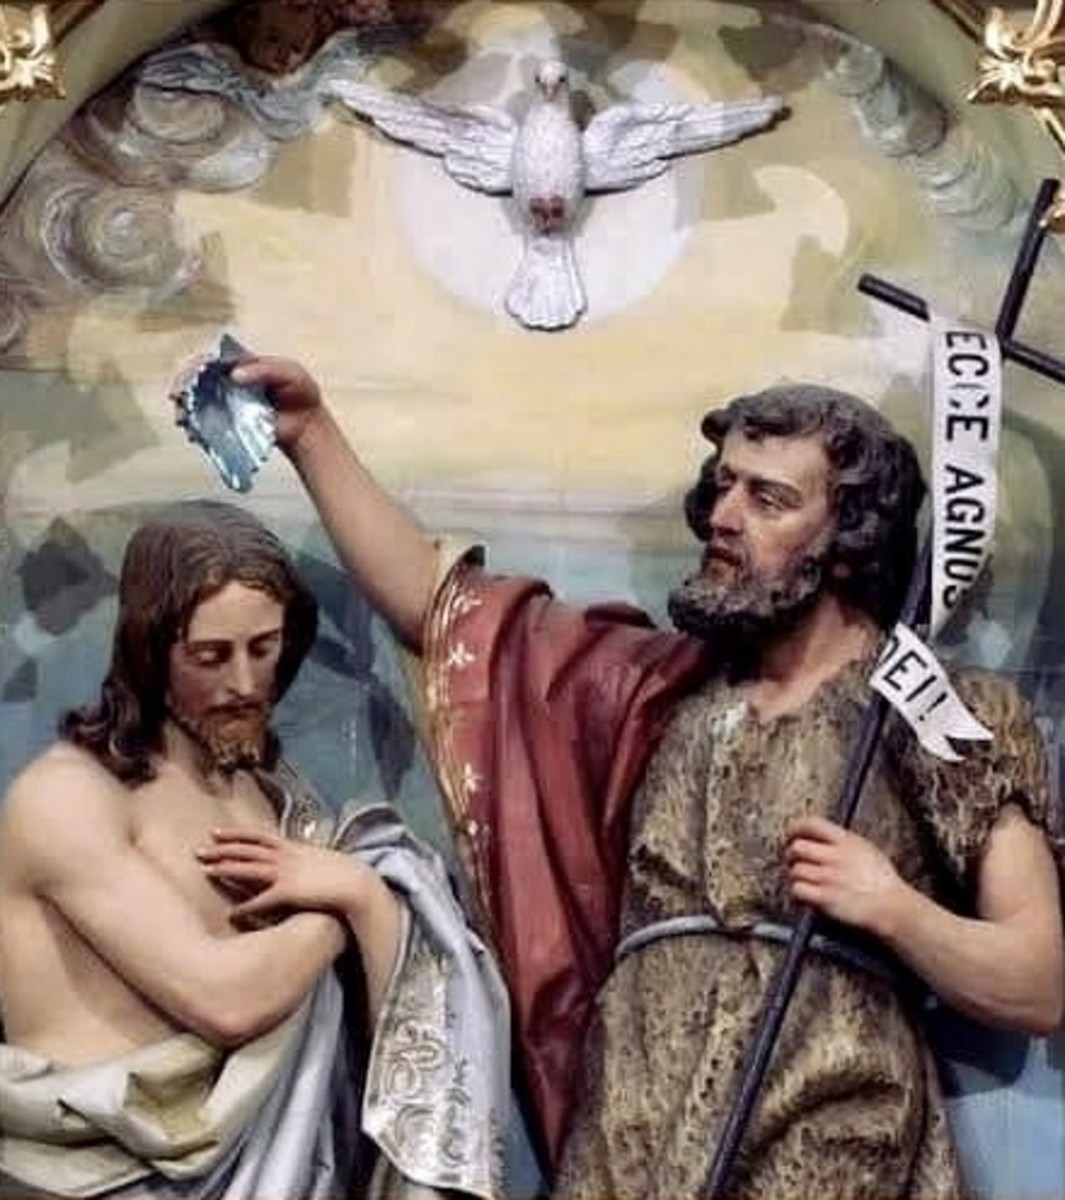 The Baptism of the Lord; Plunged into the Life of the Spirit